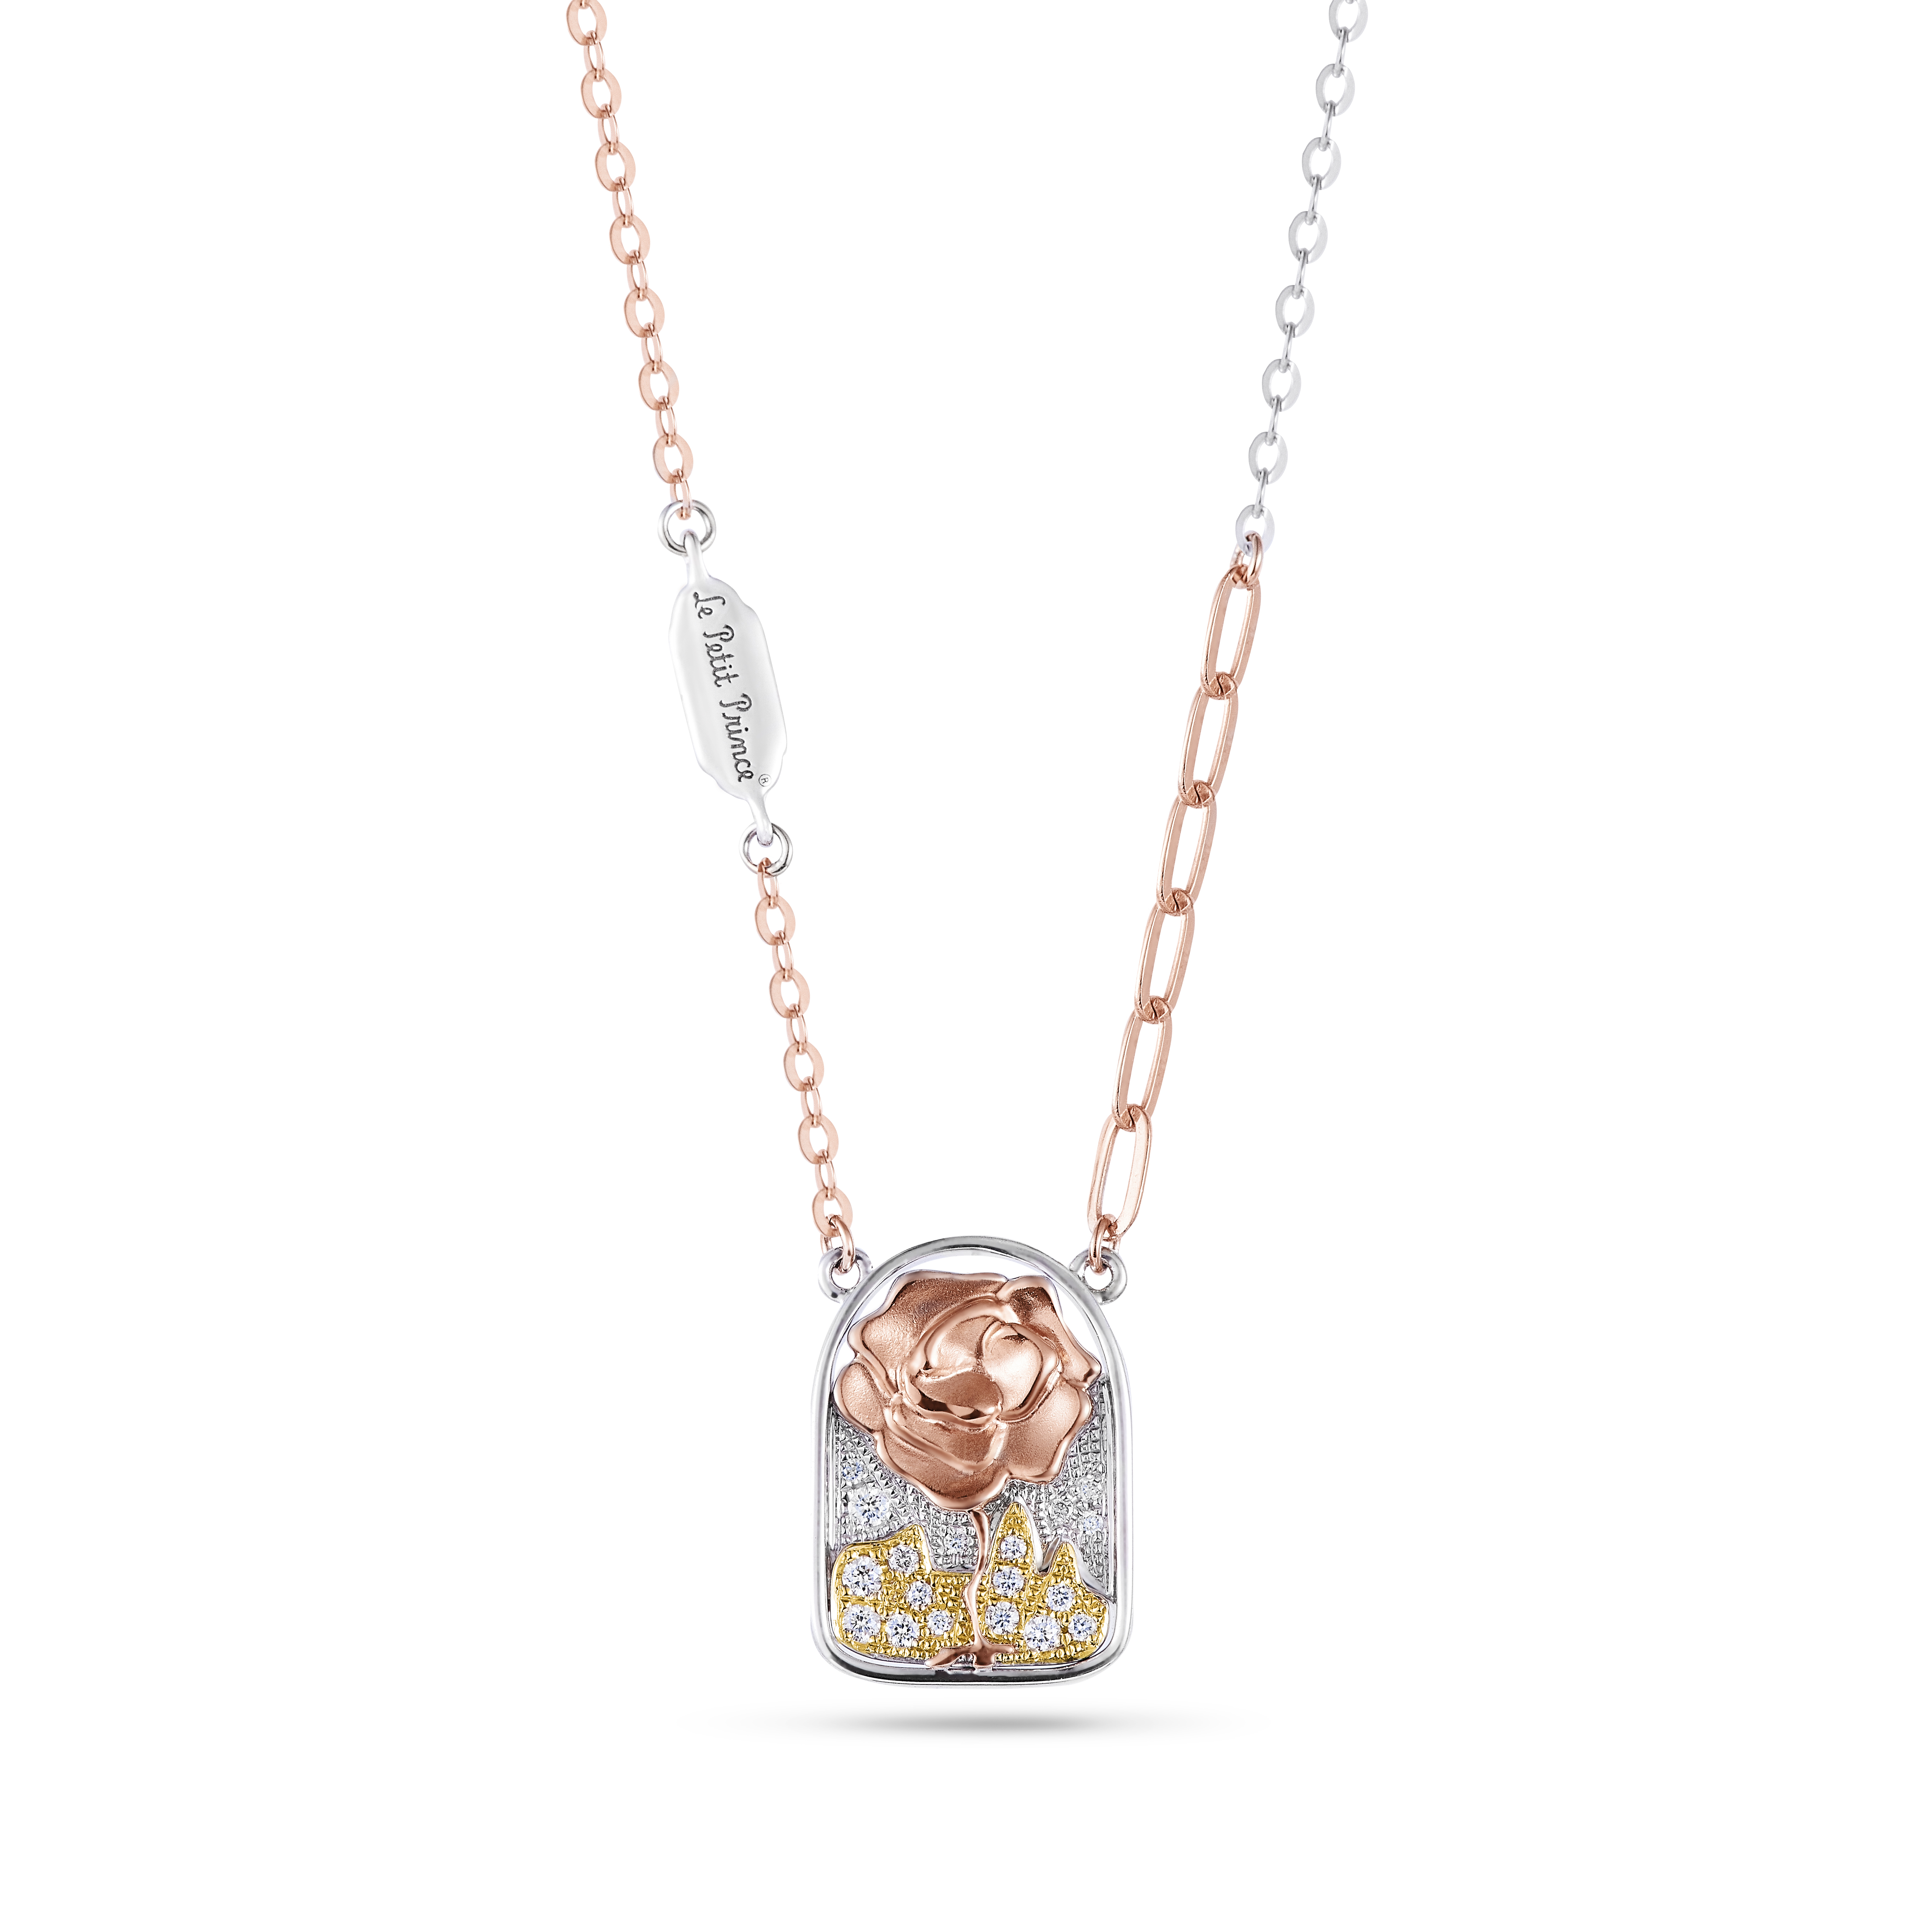 18K White Gold and Rose Gold Diamond Necklace - Rose